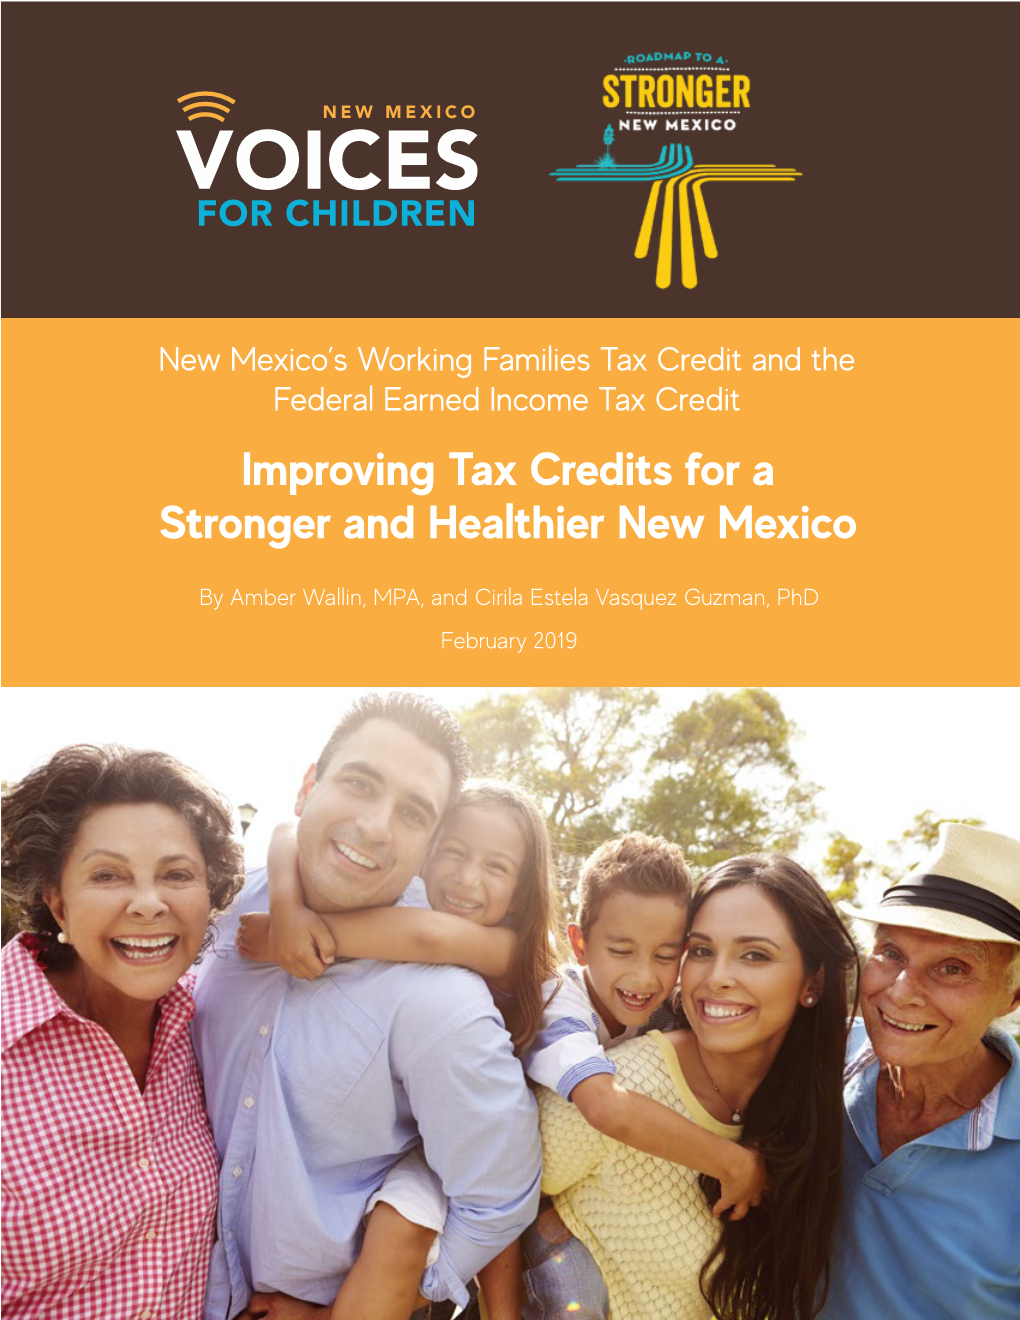 Improving Tax Credits for a Stronger and Healthier New Mexico